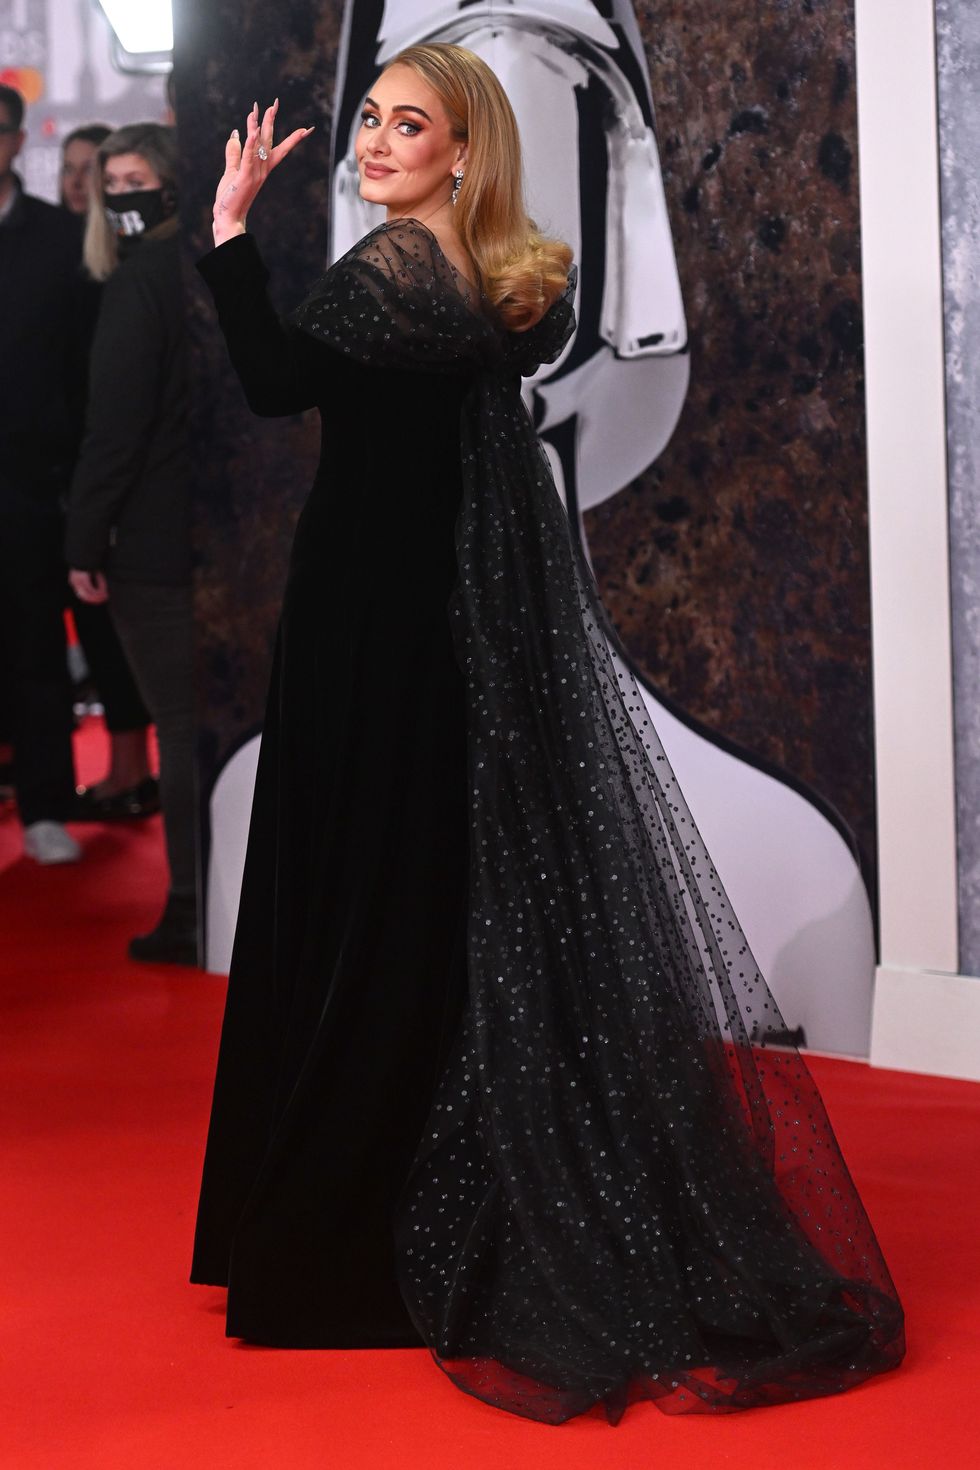 adele at the brit awards 2022